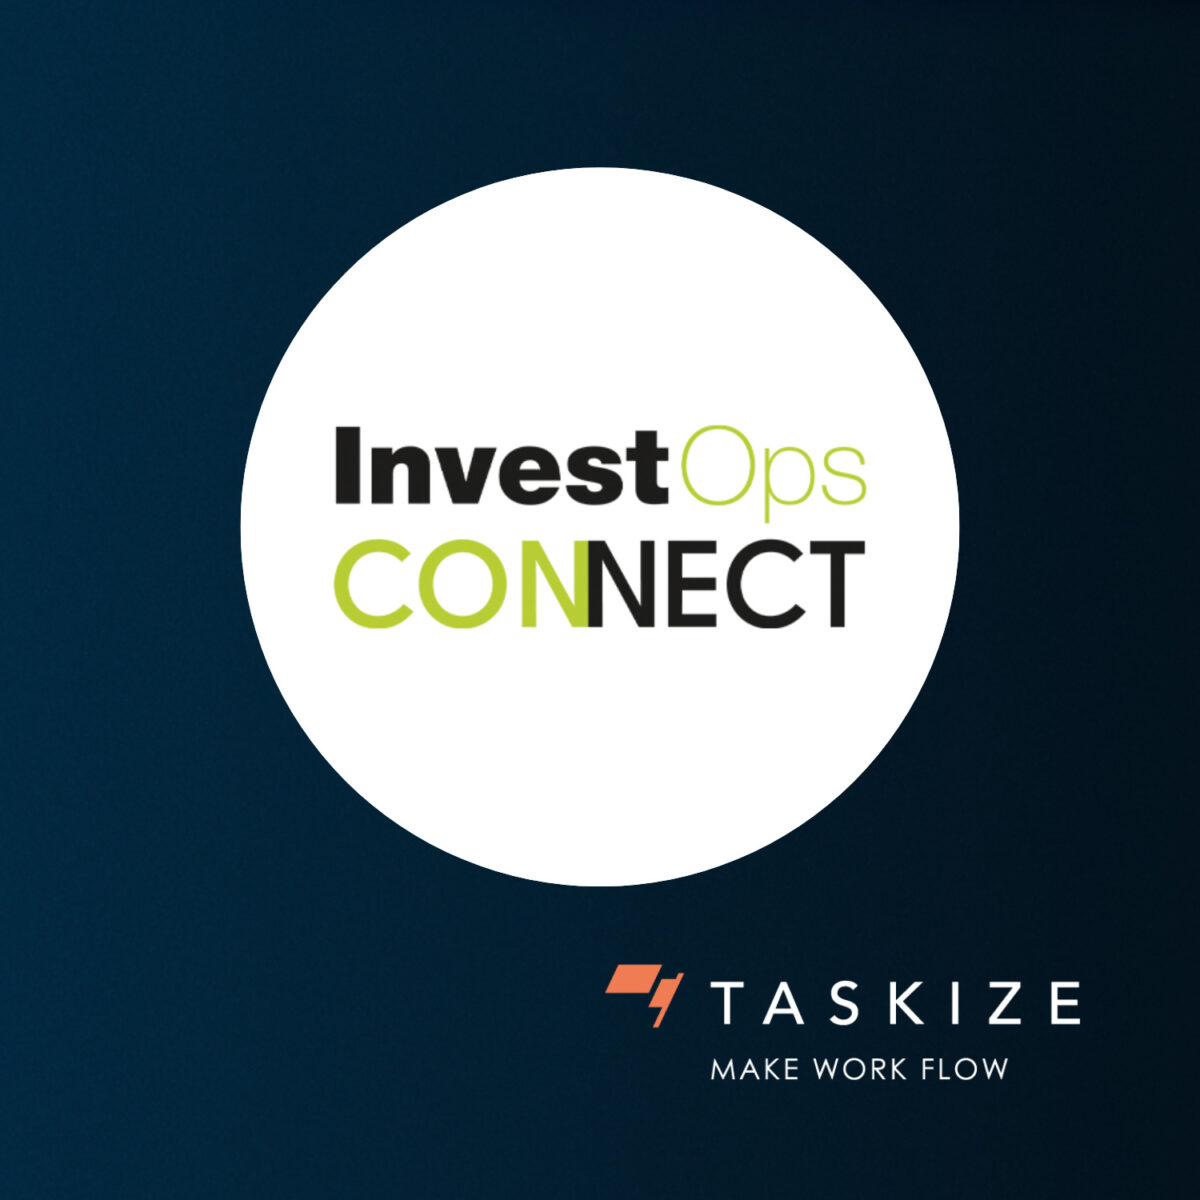 taskize-at-investops-connect